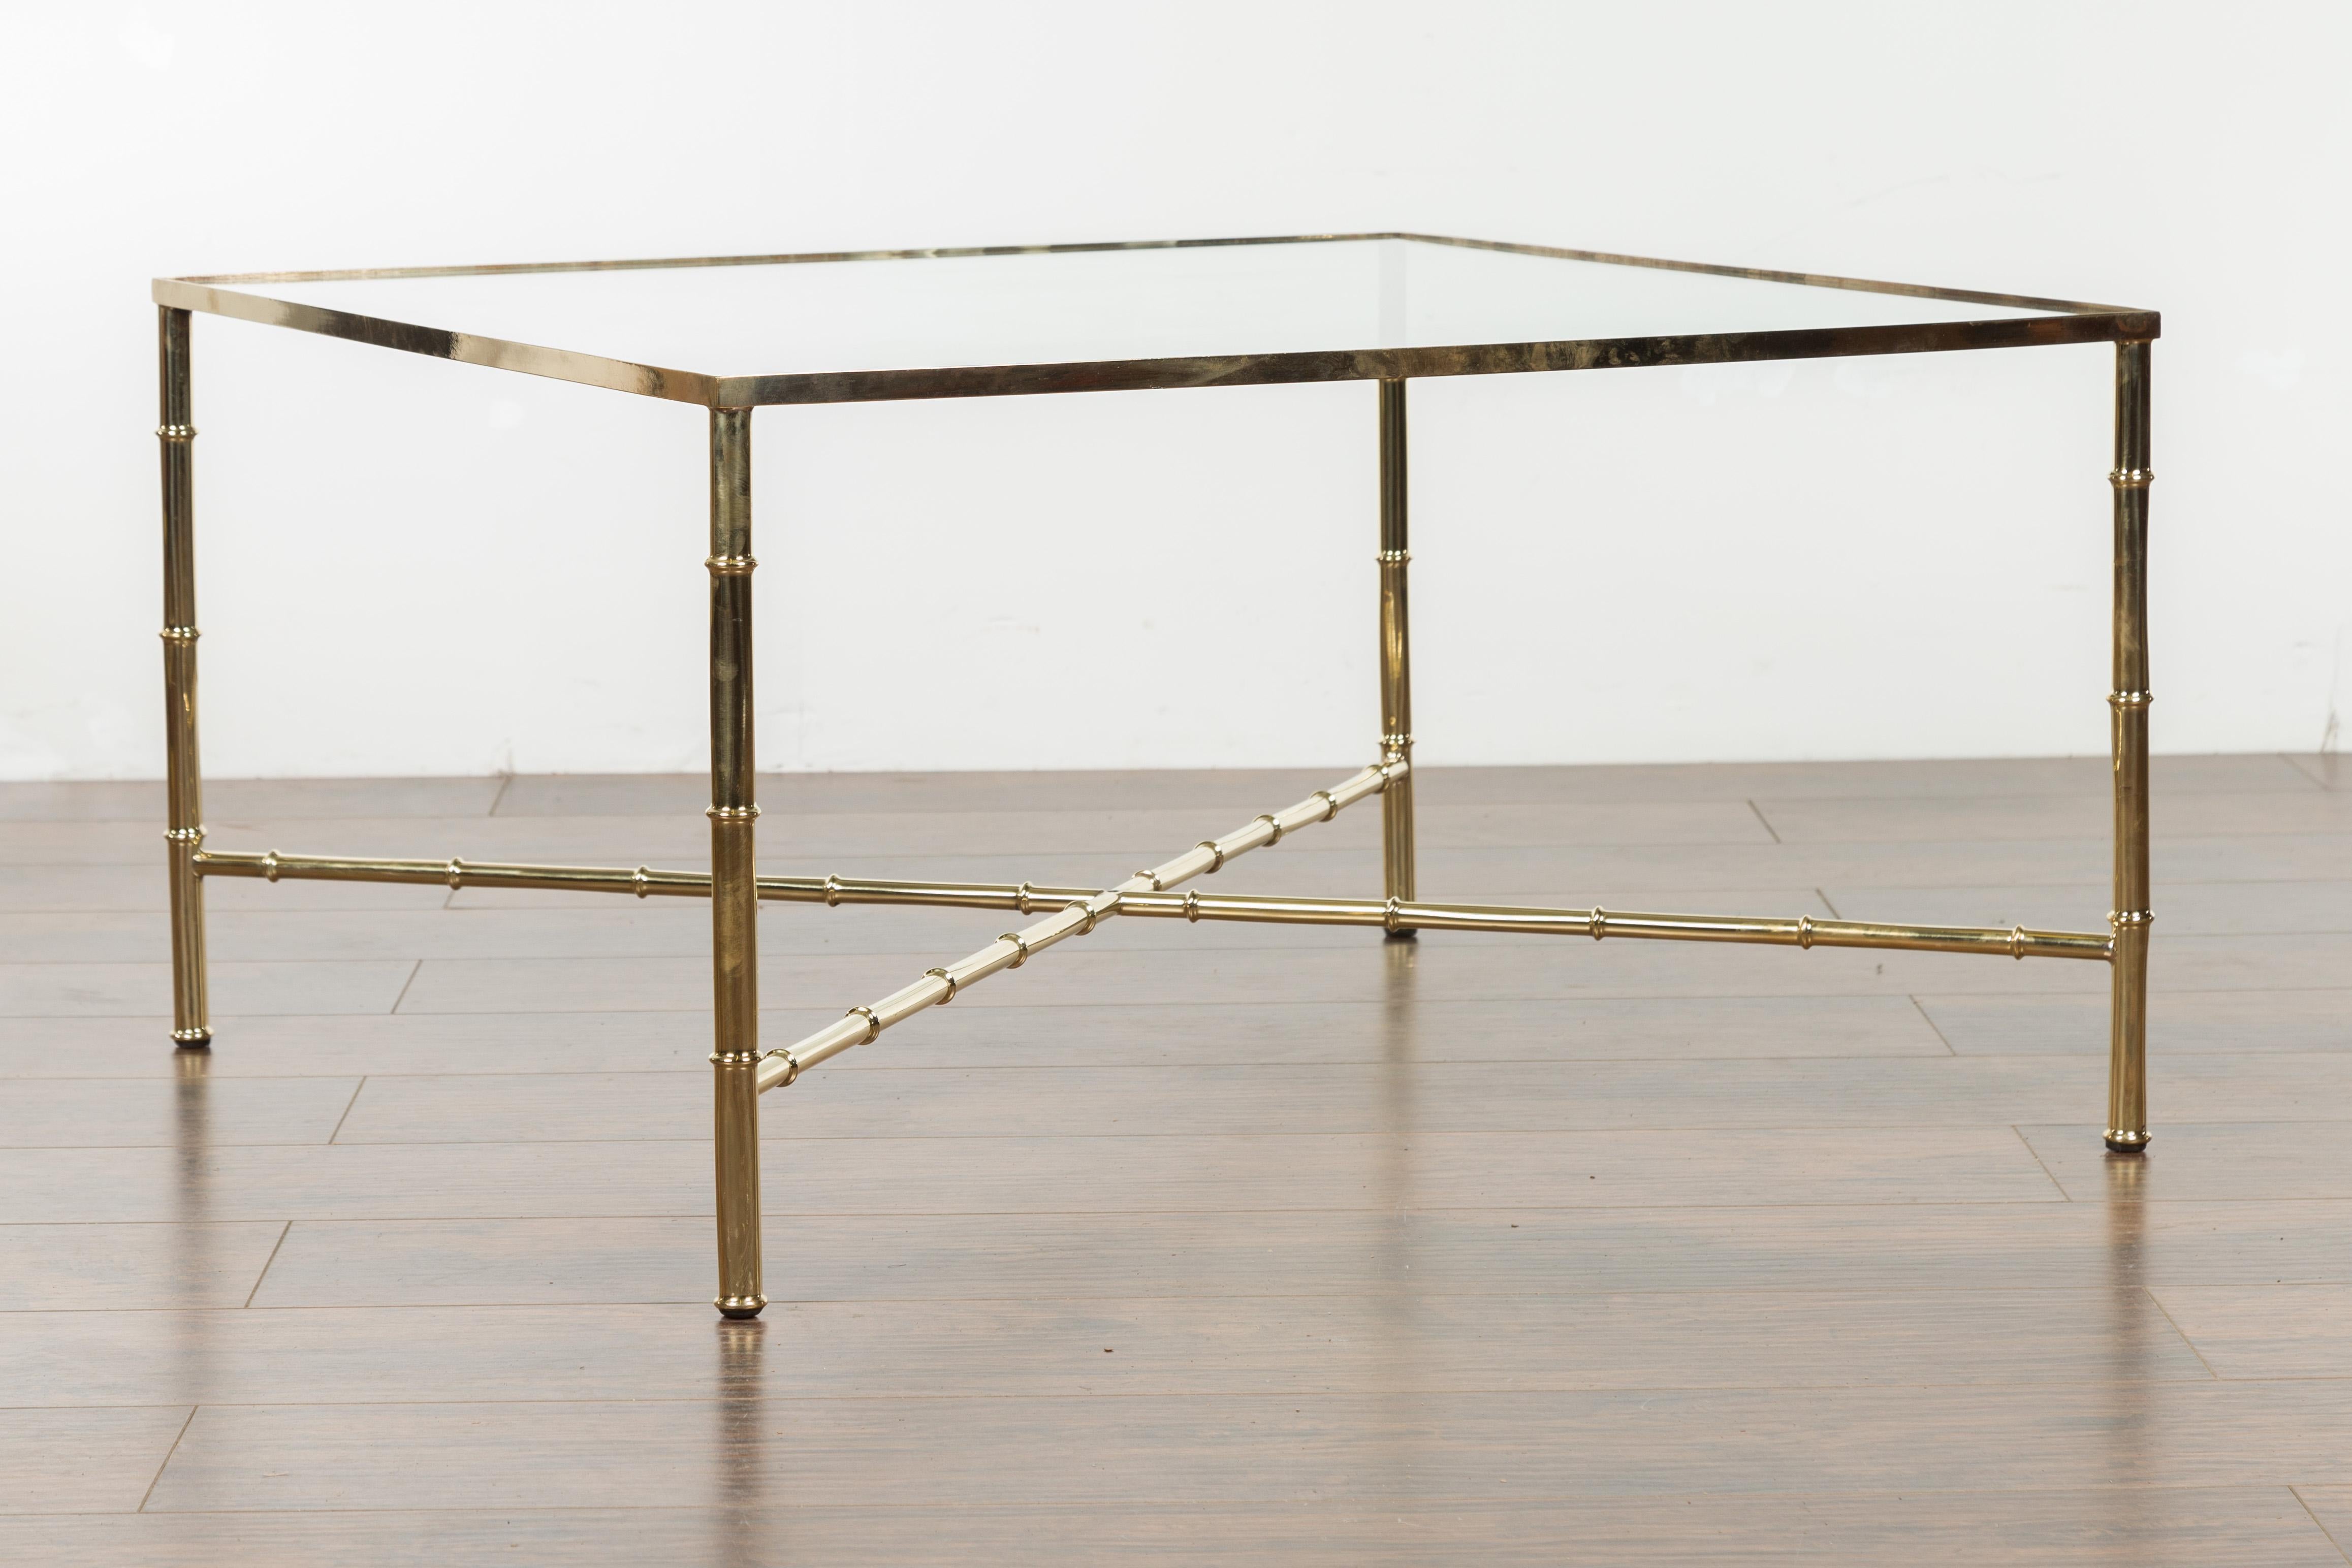 Italian Midcentury Brass Coffee Table with Glass Top and X-Form Cross Stretcher For Sale 3